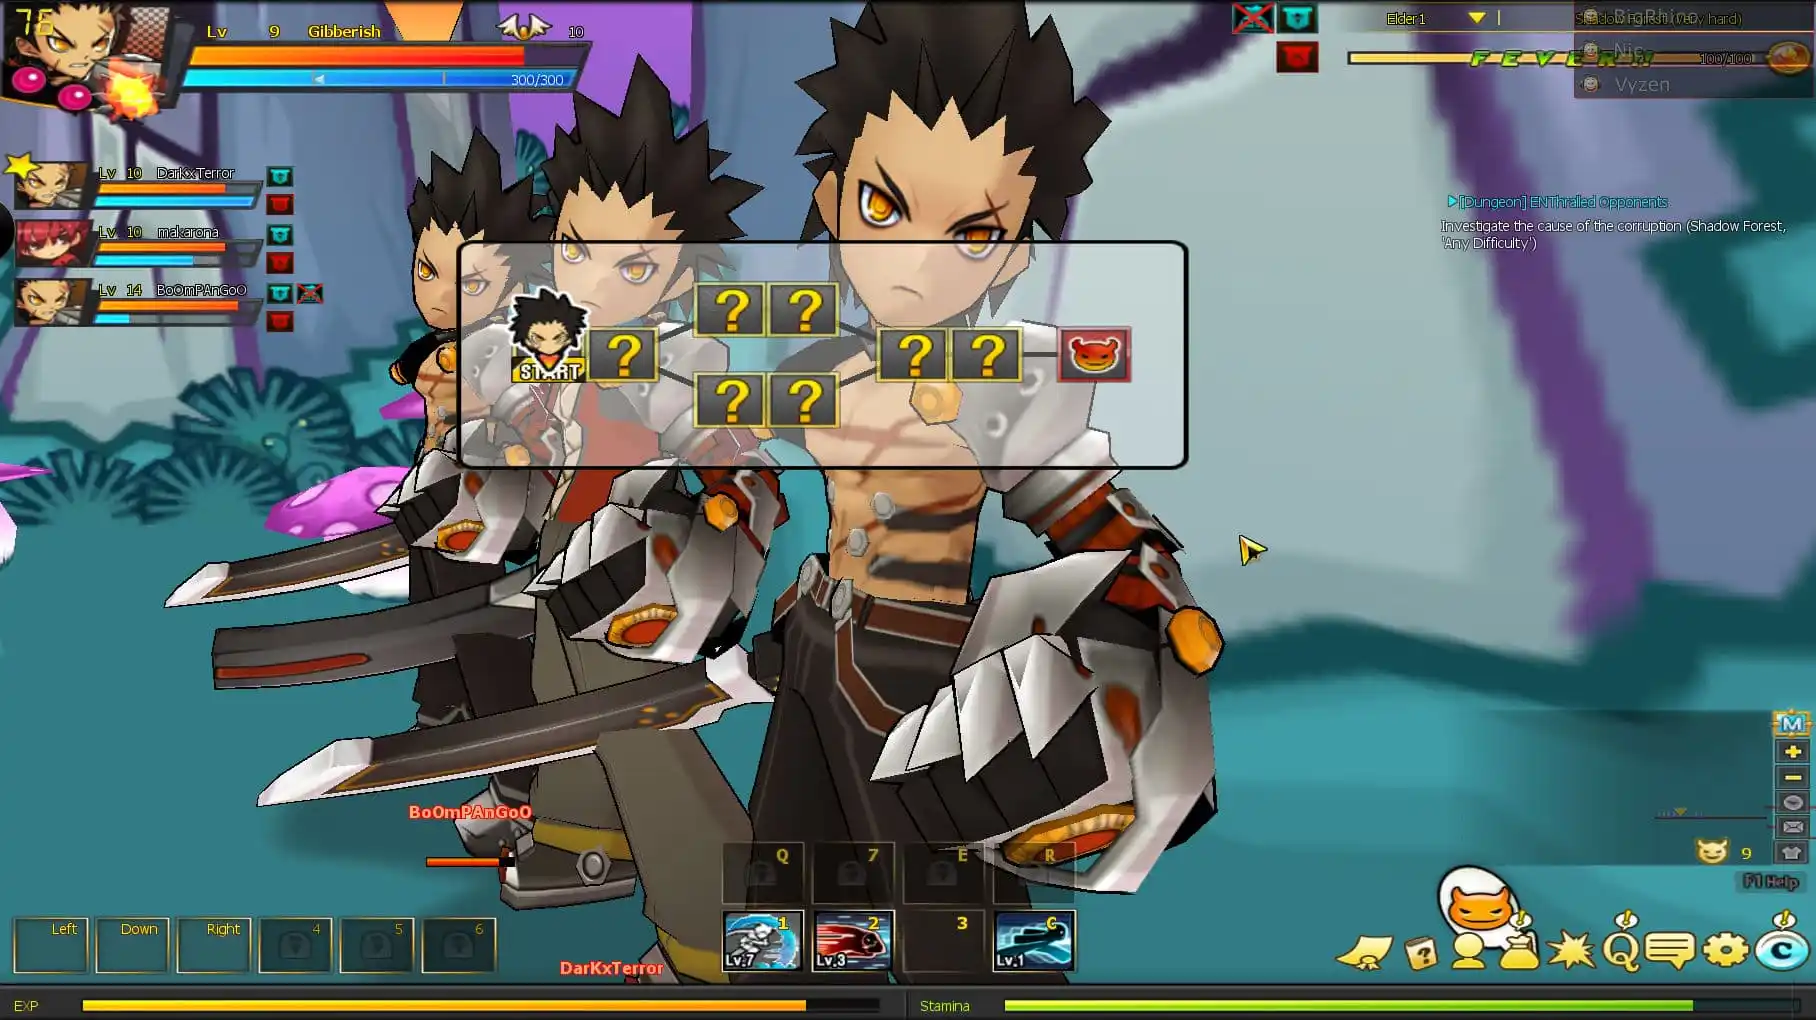  How to farm experience in Elsword 